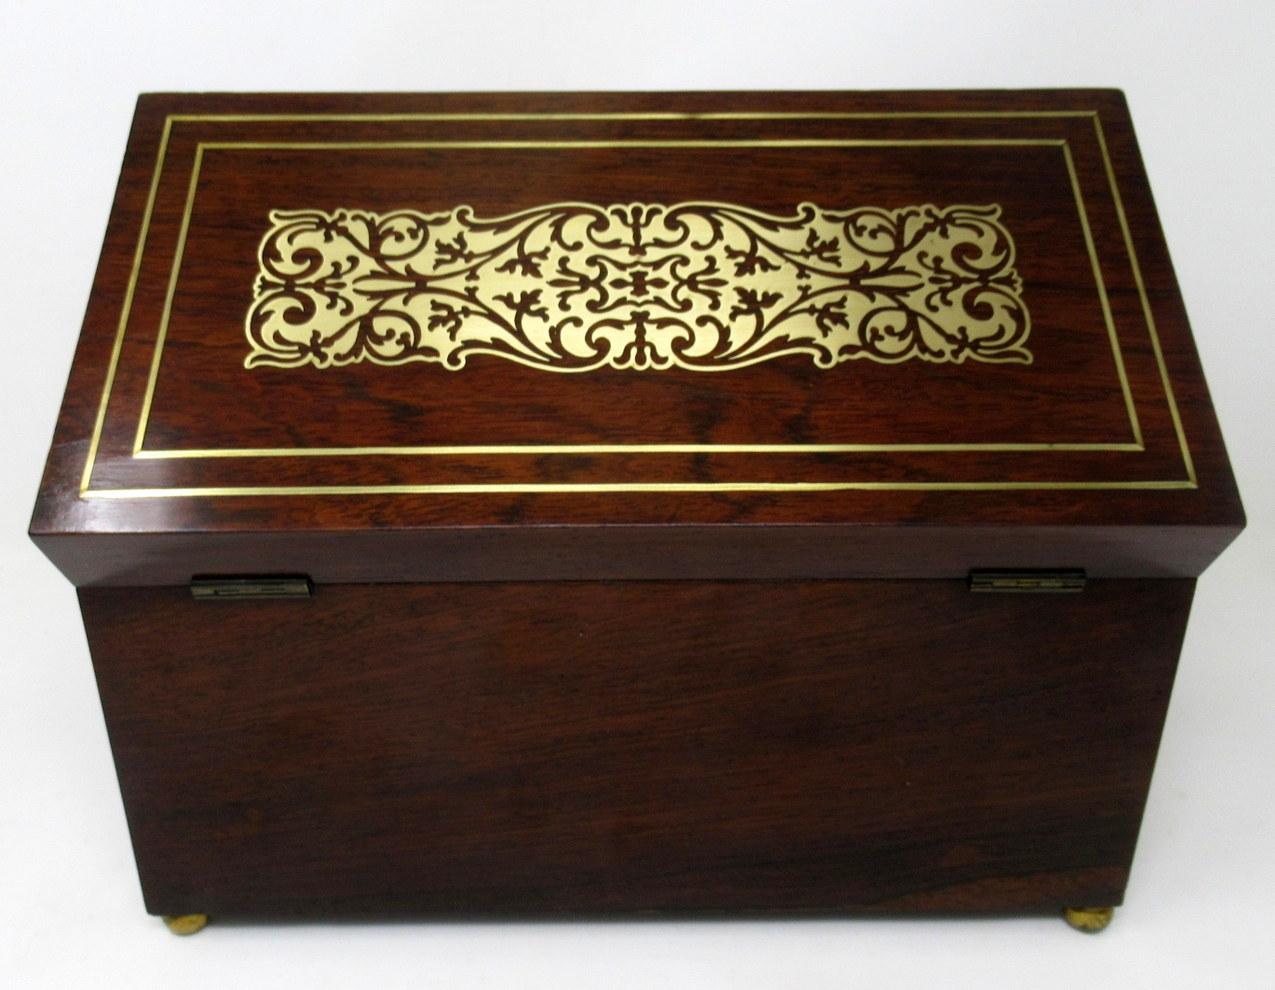 Antique Brass Inlaid English Regency Mahogany Double Tea Caddy Box 19th Century For Sale 1